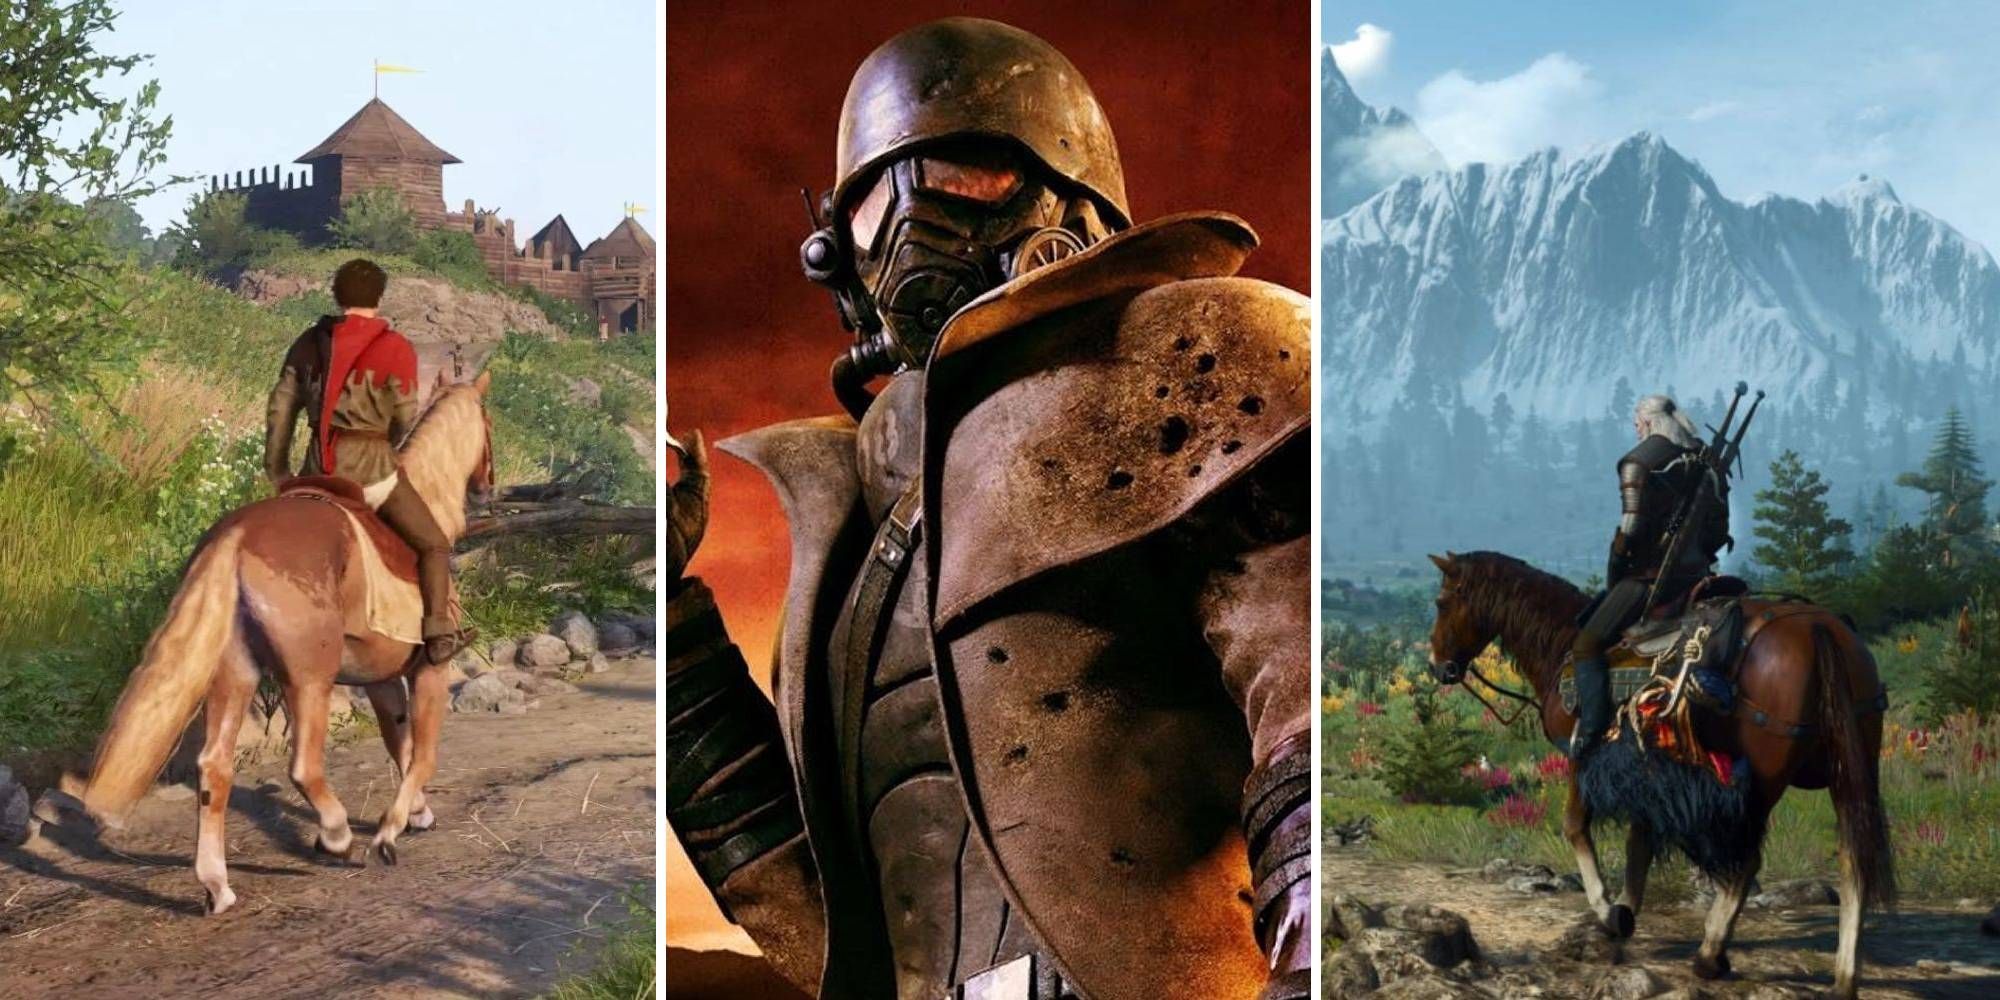 Largest RPG Worlds Feature: A rider in Kingdom Come: Deliverance, a character from Fallout, and Geralt on Roach